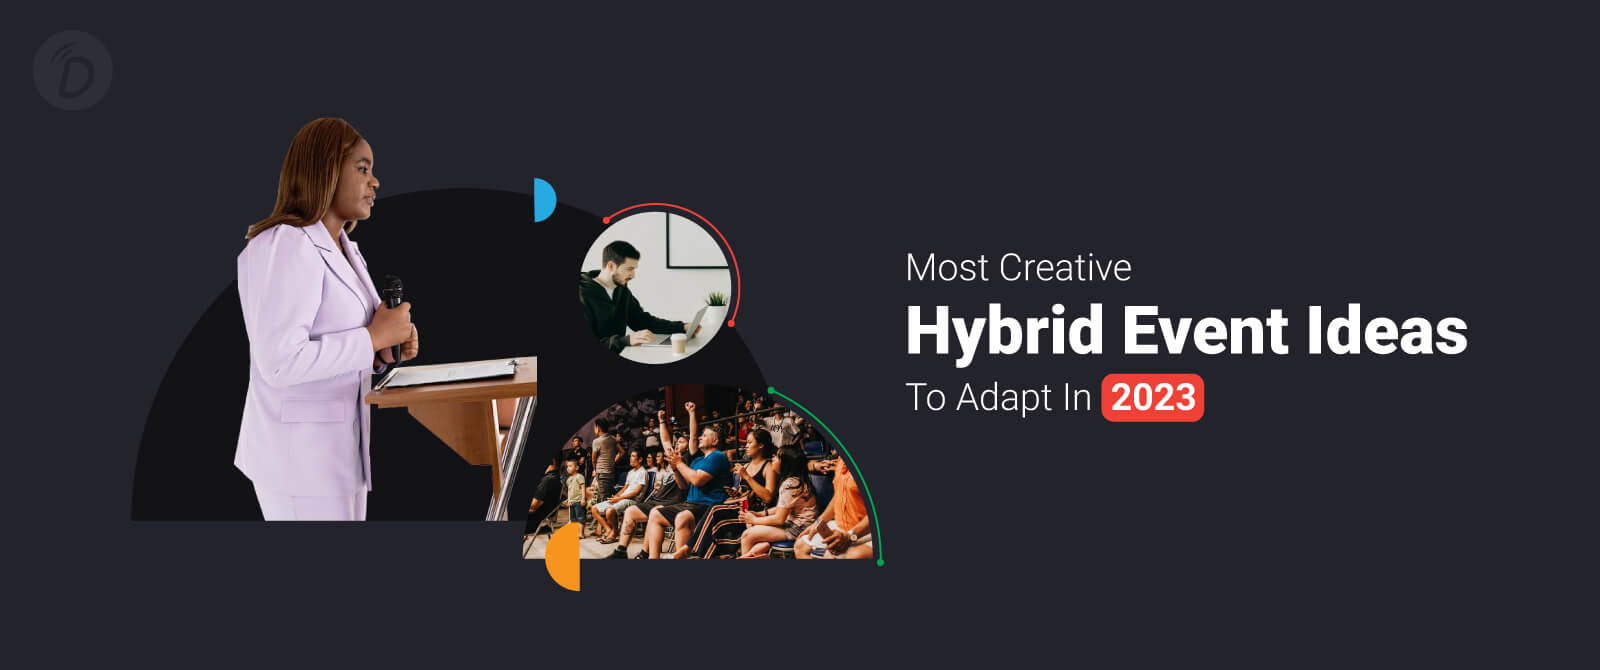 Most Creative Hybrid Event Ideas to Adapt in 2023